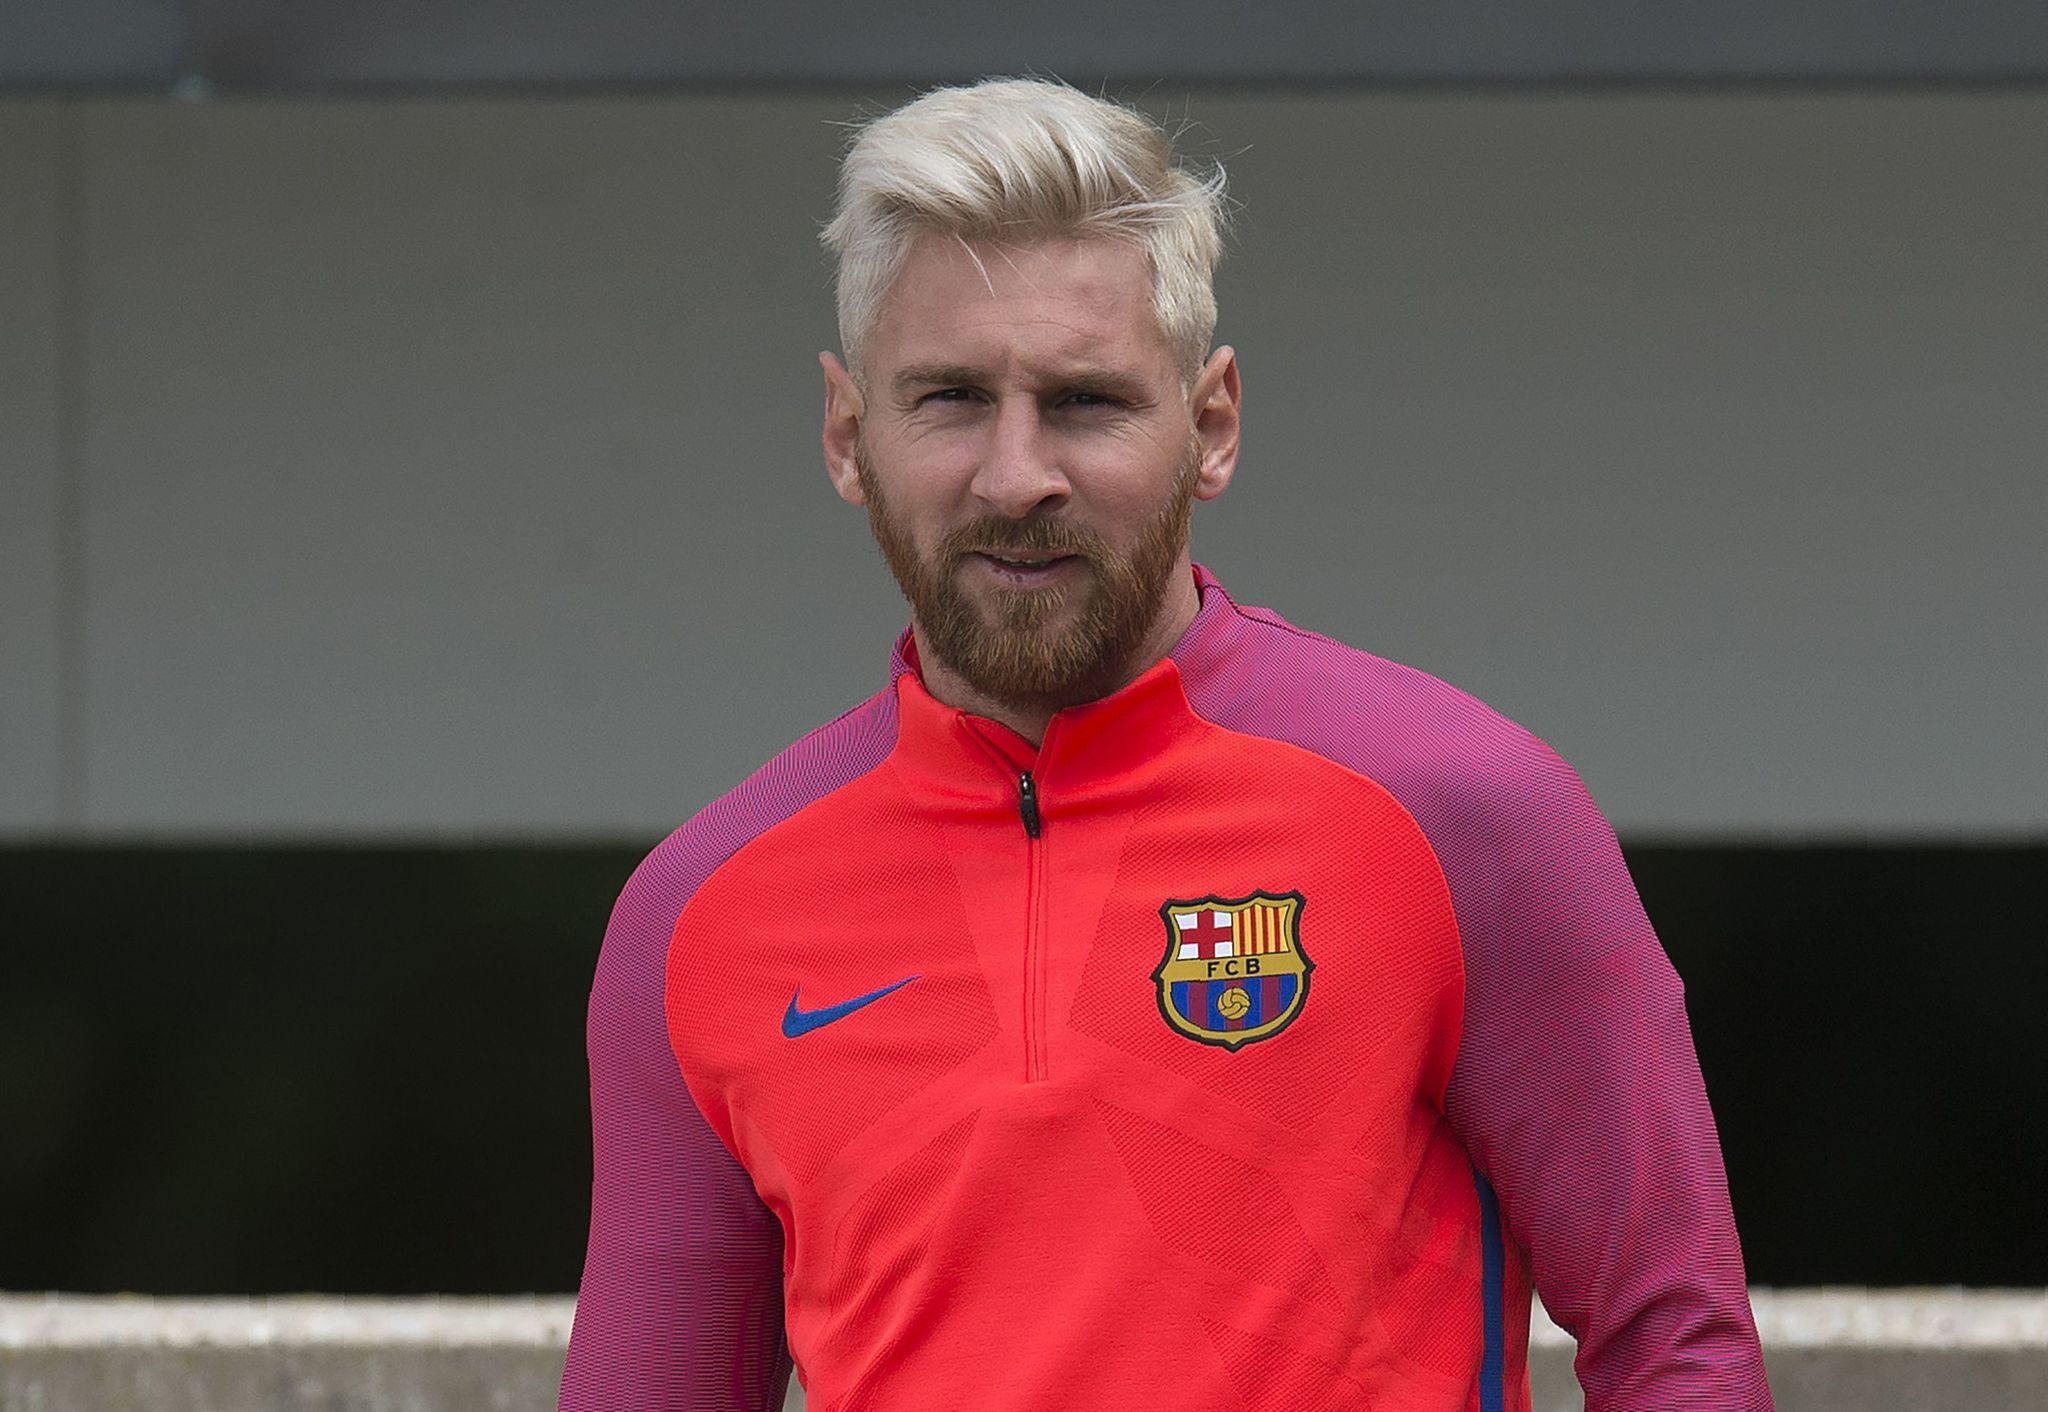 With new blond look, Lionel Messi's head not feet creating a stir - Chicago Tribune